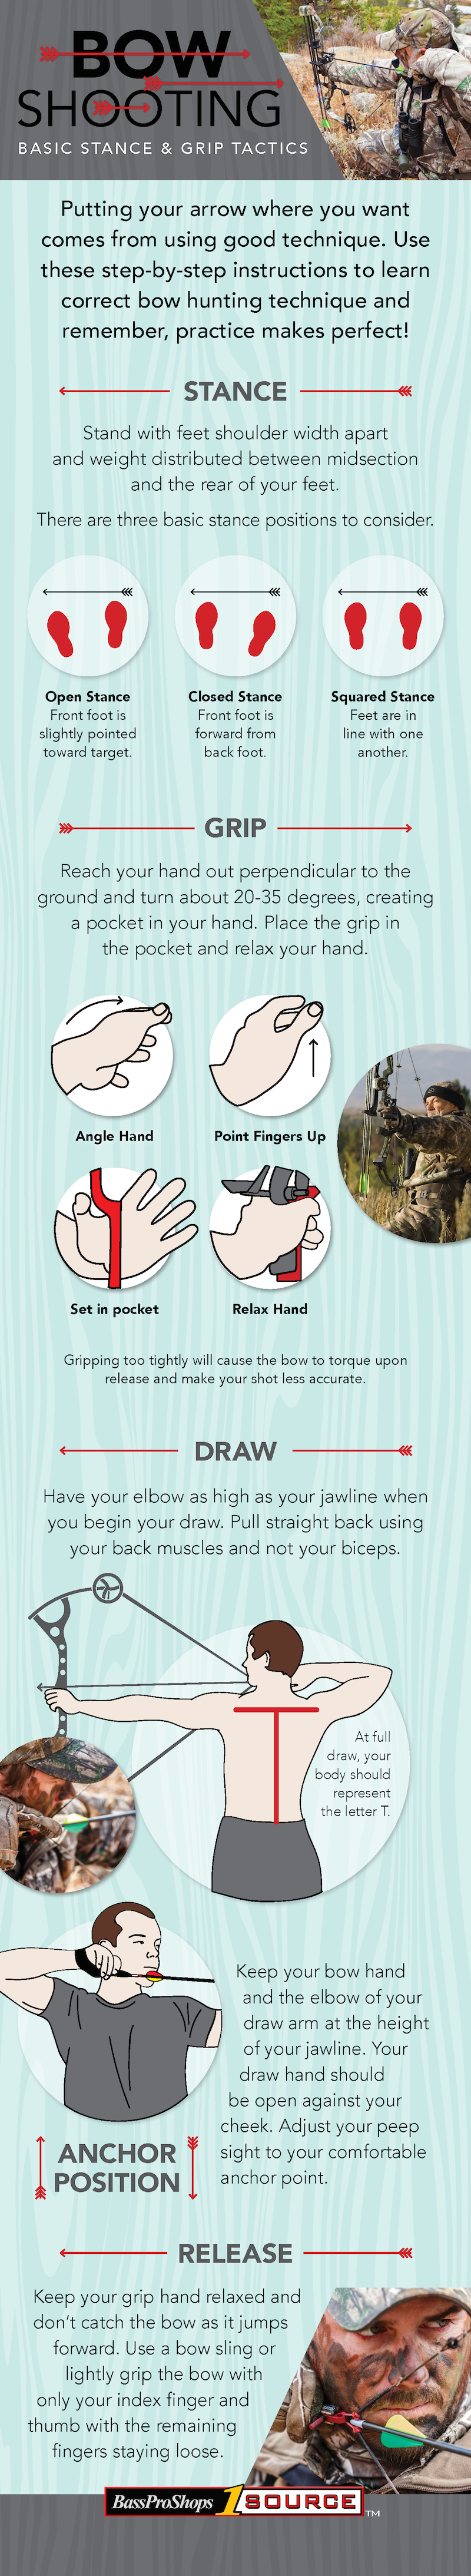 Bow Shooting stance & grip tactics showing how to place your feet, how to grip, how to draw the bow & release the arrow. 